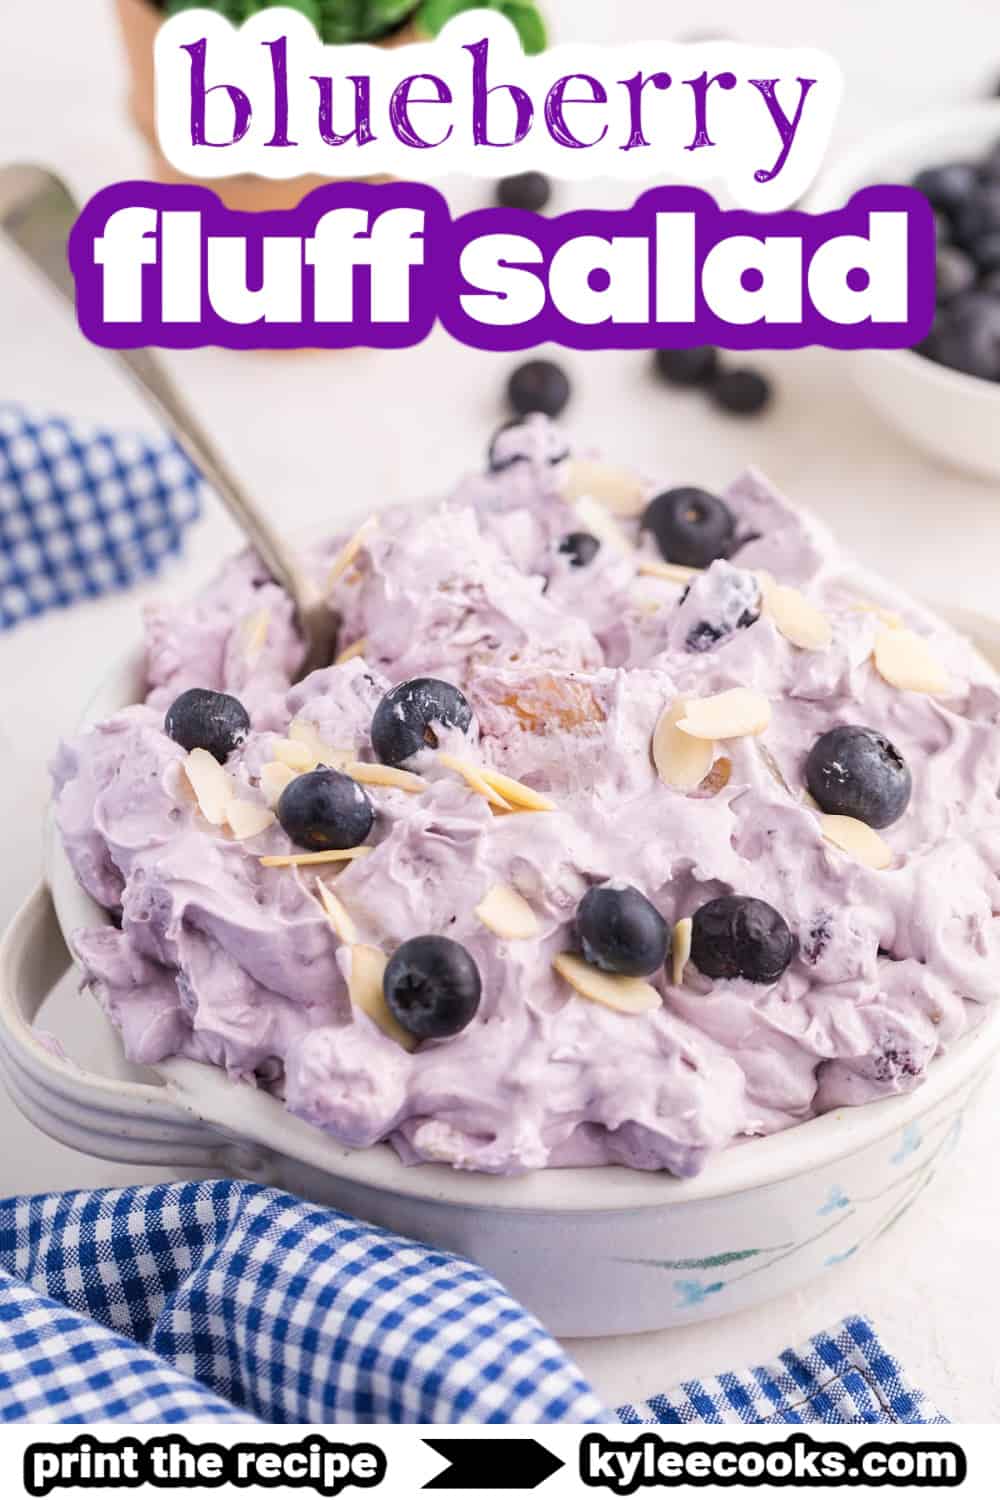 blueberry fluff salad with text overlaid.